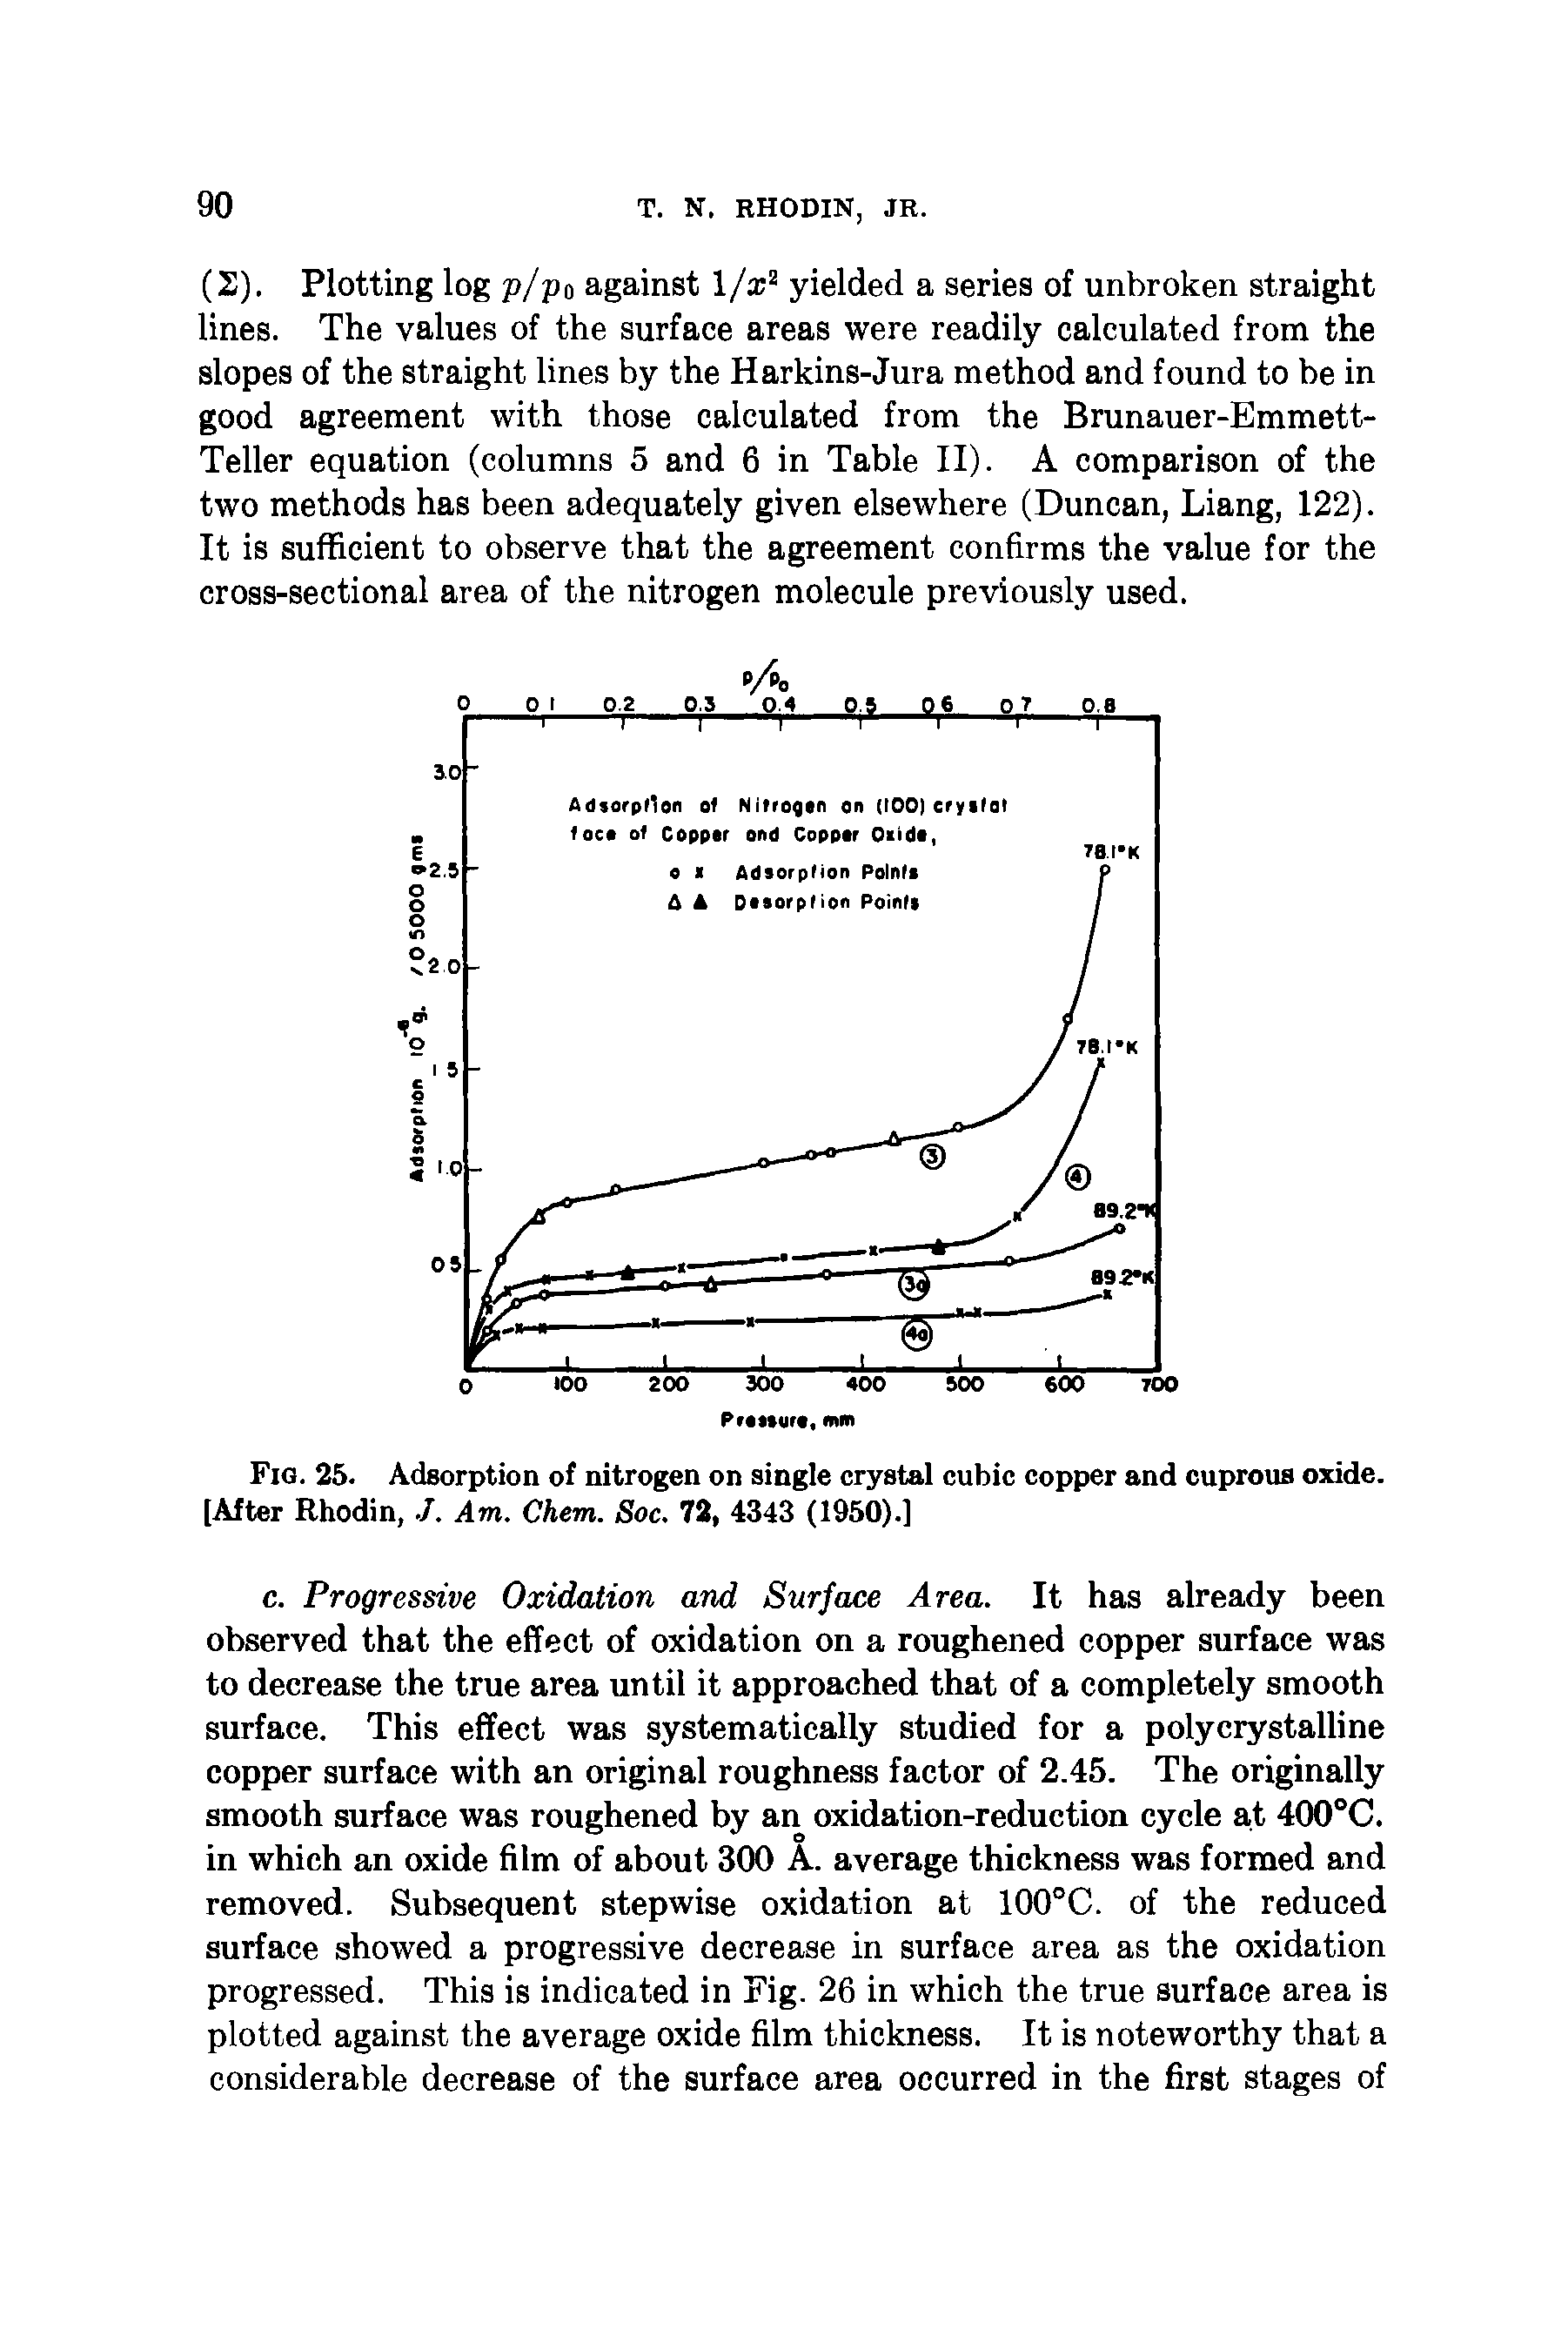 Fig. 25. Adsorption of nitrogen on single crystal cubic copper and cuprous oxide. [After Rhodin, J. Am. Chem. Soc. 72, 4343 (1950).]...